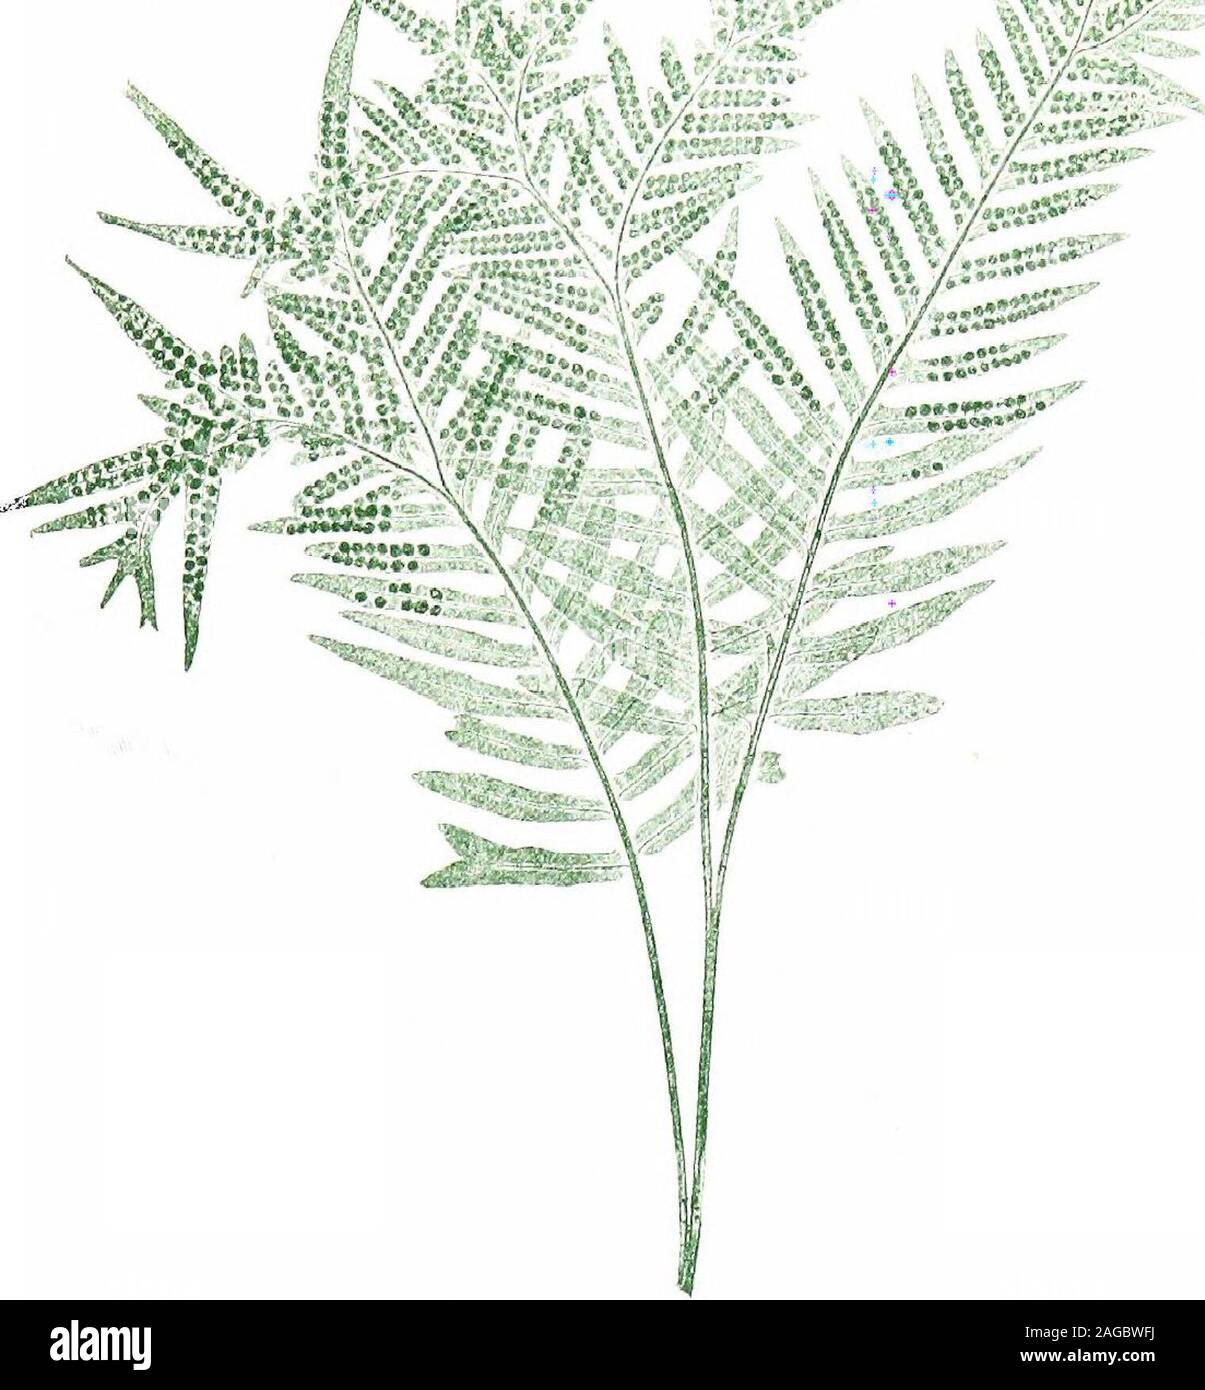 . British ferns and their varieties. XLII POLYPODIUM VULGARE, VUT. GRANDICEPS FoX 348 BRITISH FERNS XLIII Ramosum C. Hillman. Hants, i860. By Mr. Wollaston. -.. %. j^ Vf4 P , &gt;V. XLIII POLYPODIUM VULGARE, VCtr. RAMOSUM HlLLMAN 350 BRITISH FERNS XLIV Congestum Preston ( Woll.)Mr. R. P. Preston, Yelland, Carnforth. Lancashire. 1S71. 11 in.Syn. Prestonii {Moore) Mr. Barnes records the discovery in the north of the followingplumose forms of the species :—Prestonii, found in 1871 on thelimestone range called Warton Crag, Lancashire, by Mr. Preston,of Yelland ; Barrowii, found in 1874 near Wither Stock Photo